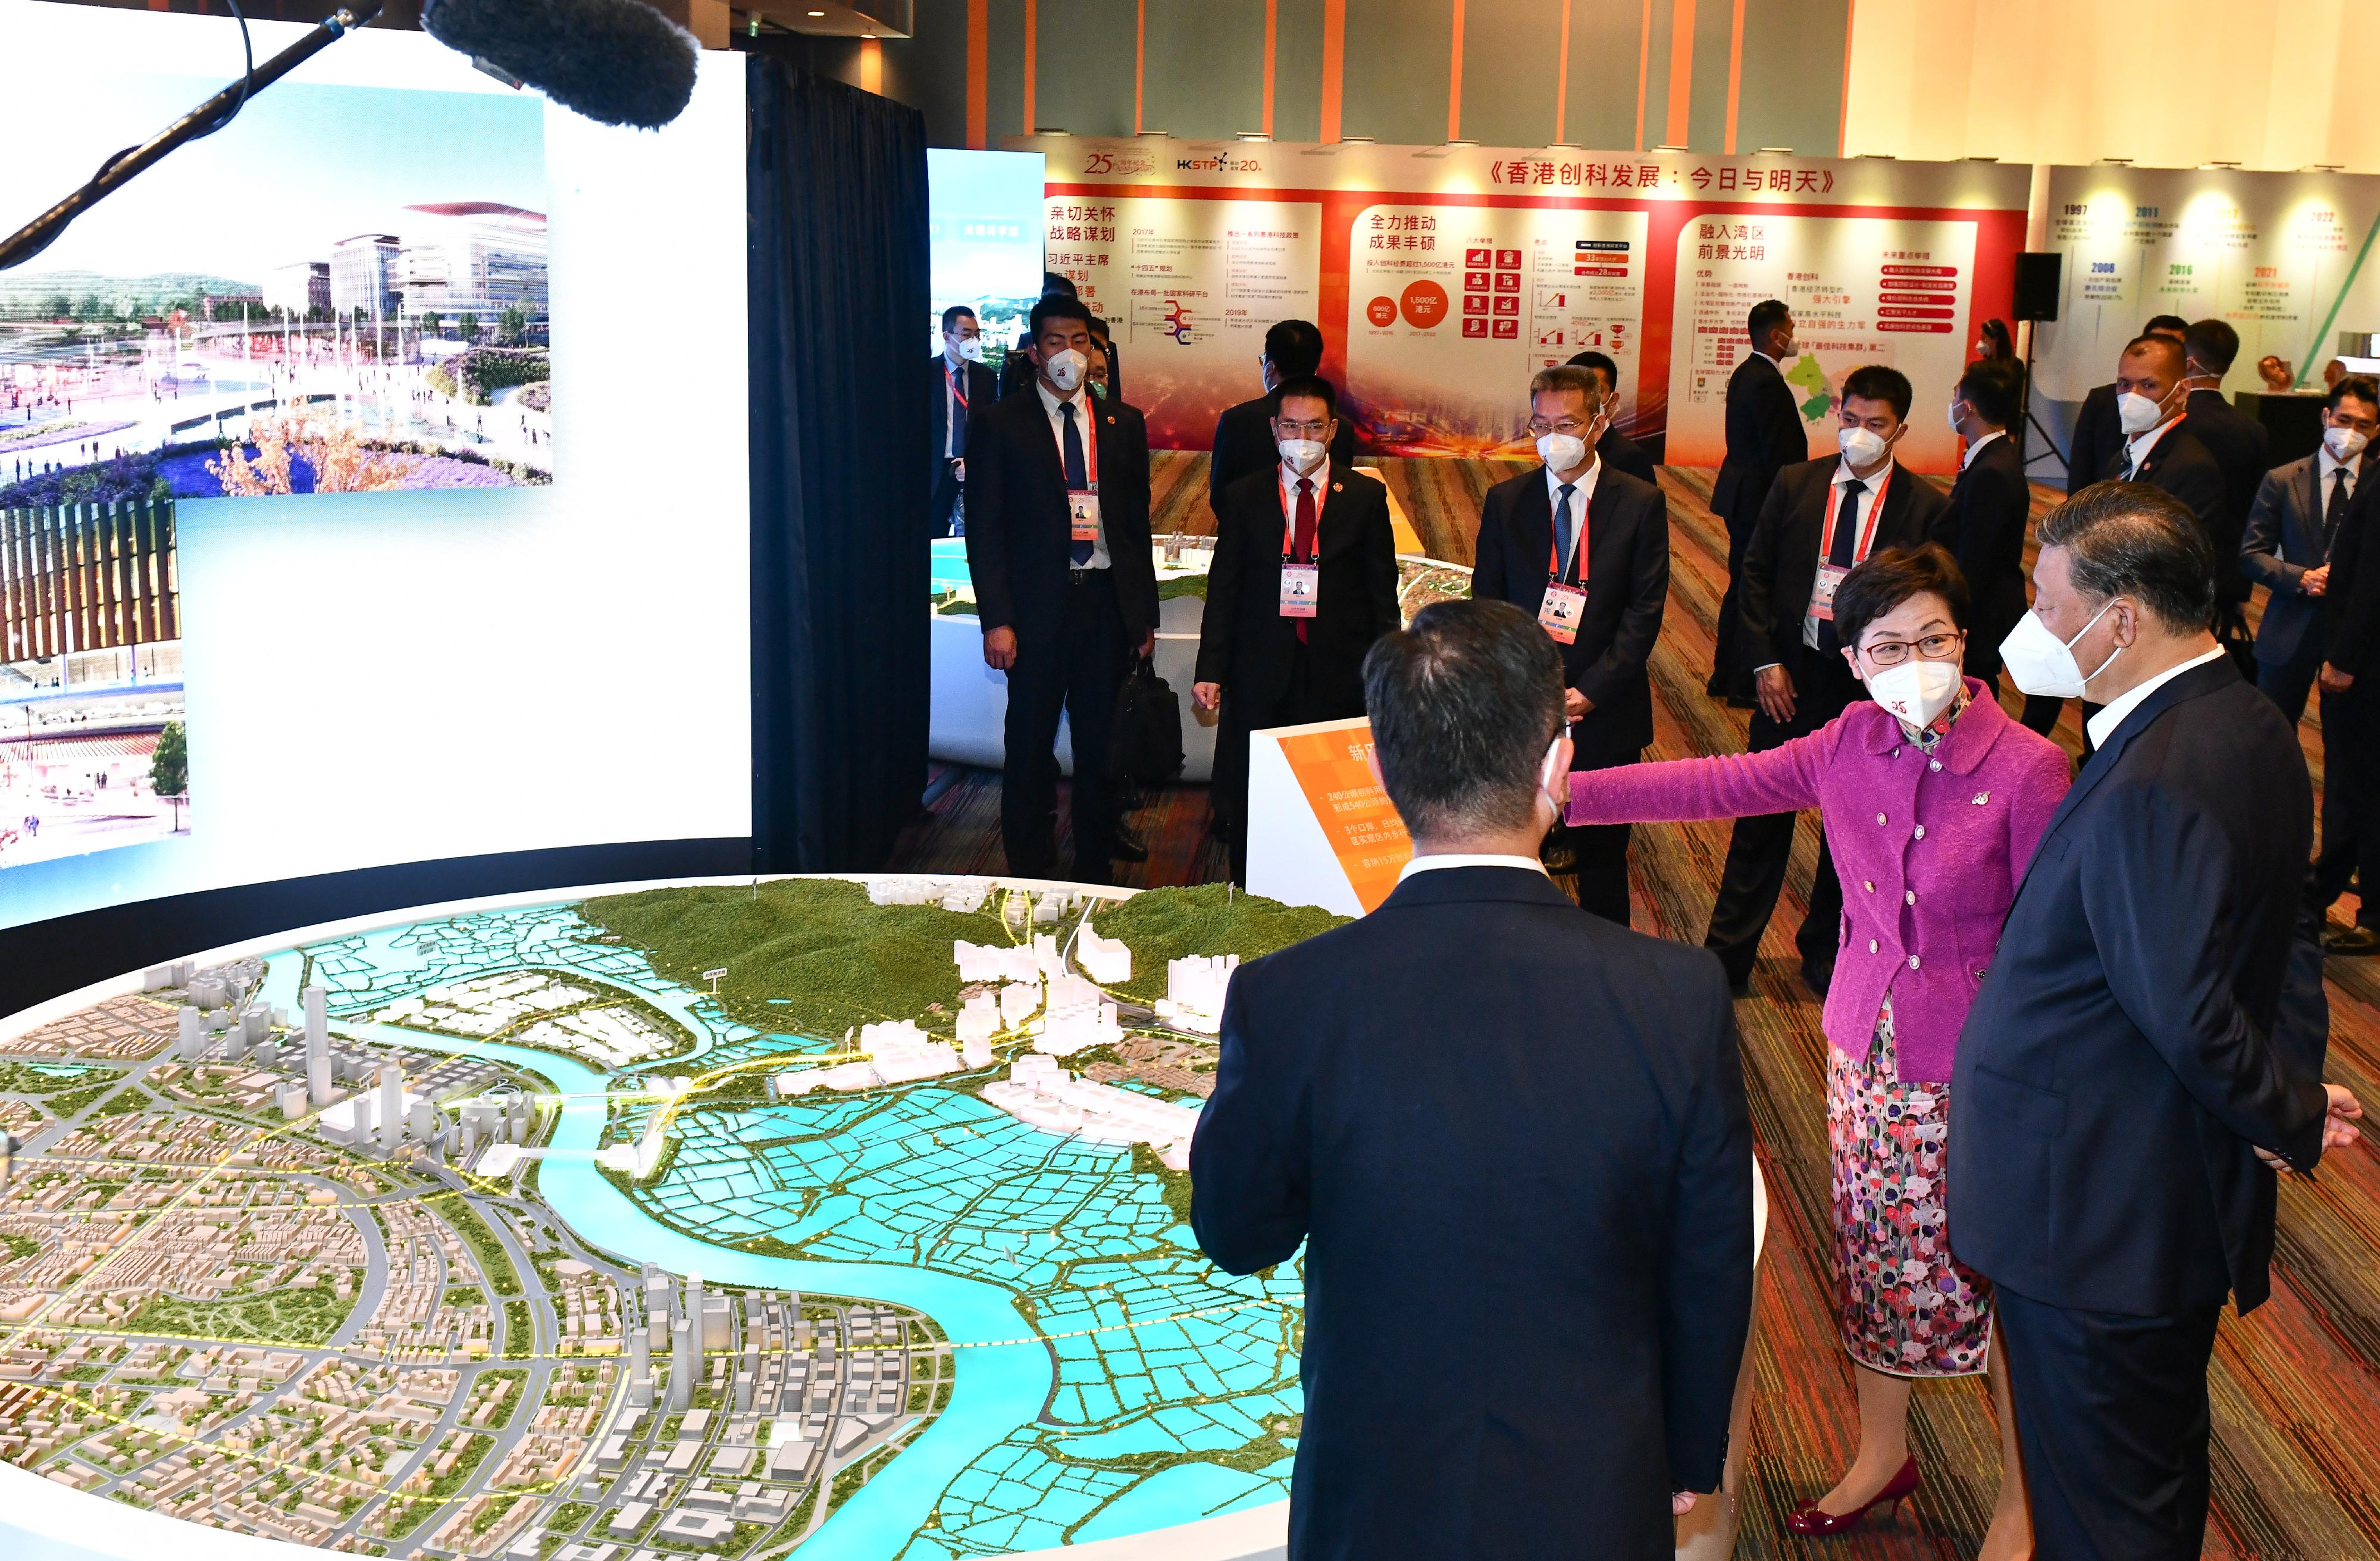 President Xi Jinping visited the Hong Kong Science Park to inspect the development of innovation and technology (I&T) in Hong Kong today (June 30). Photo shows President Xi (first right), accompanied by the Chief Executive, Mrs Carrie Lam (second right), receiving a briefing from the Secretary for Innovation and Technology, Mr Alfred Sit (first left), on the overall I&T strengths and development in Hong Kong.